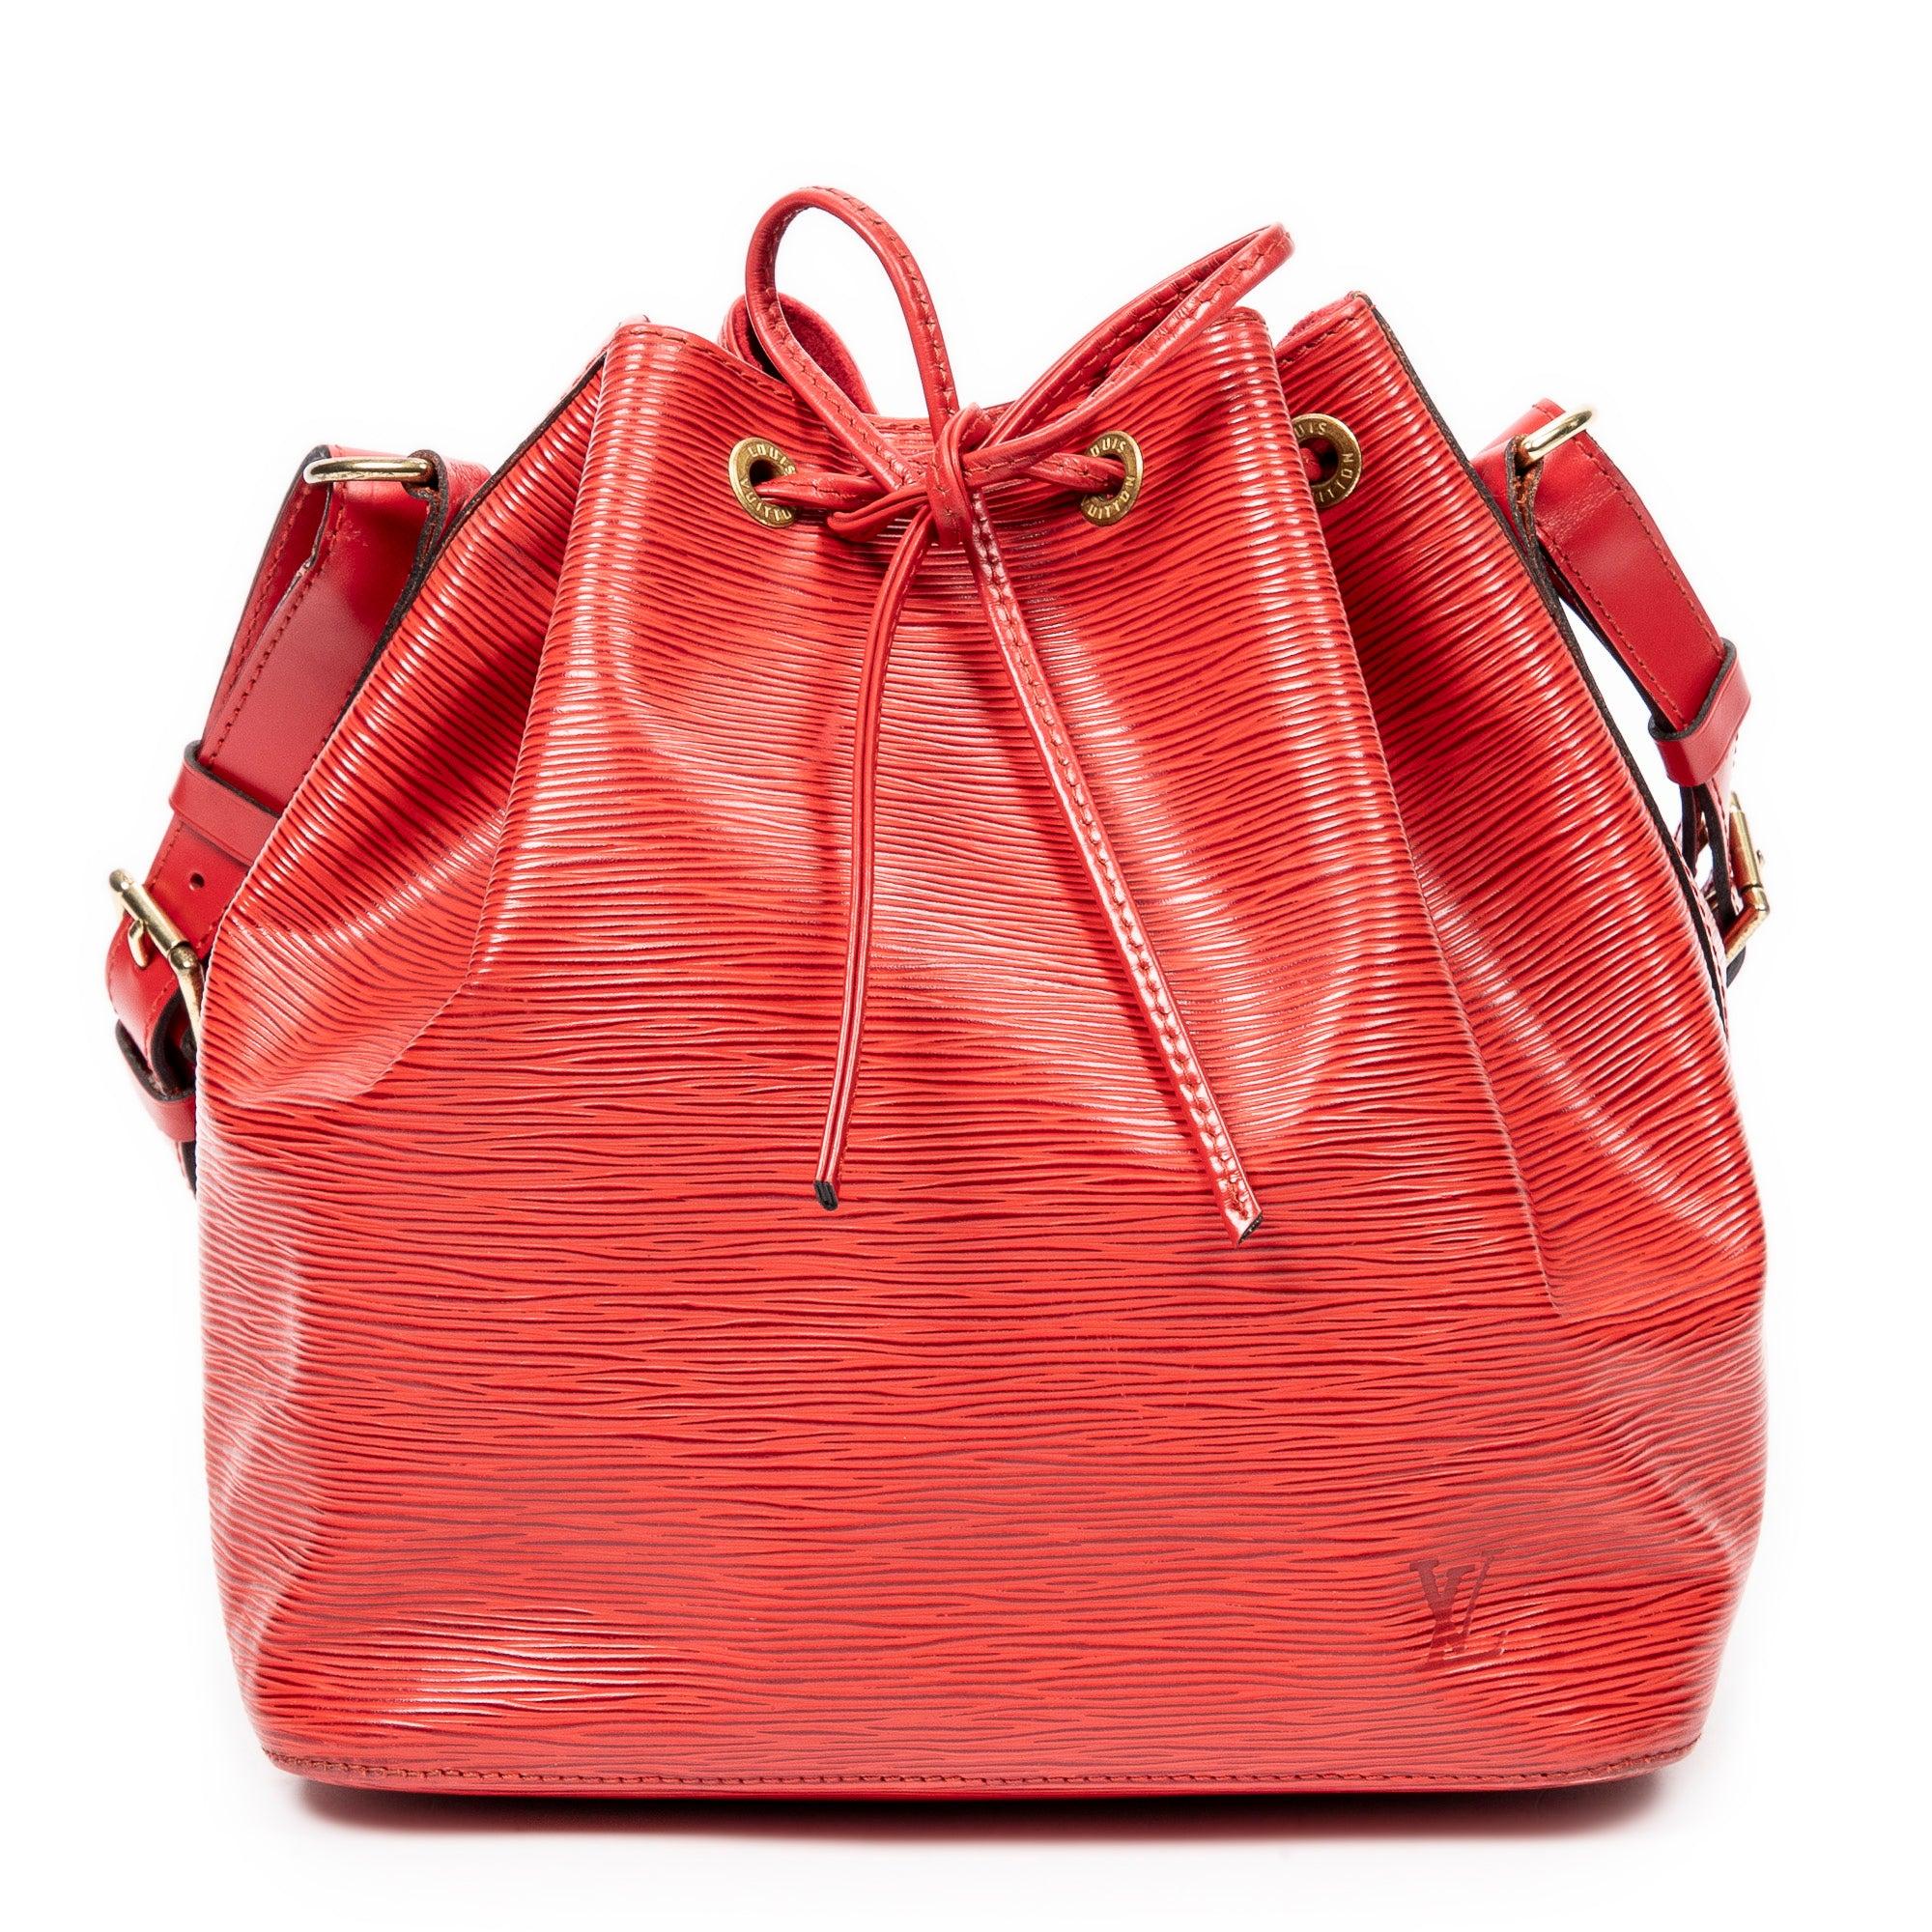 Louis Vuitton Noe Pm in Red